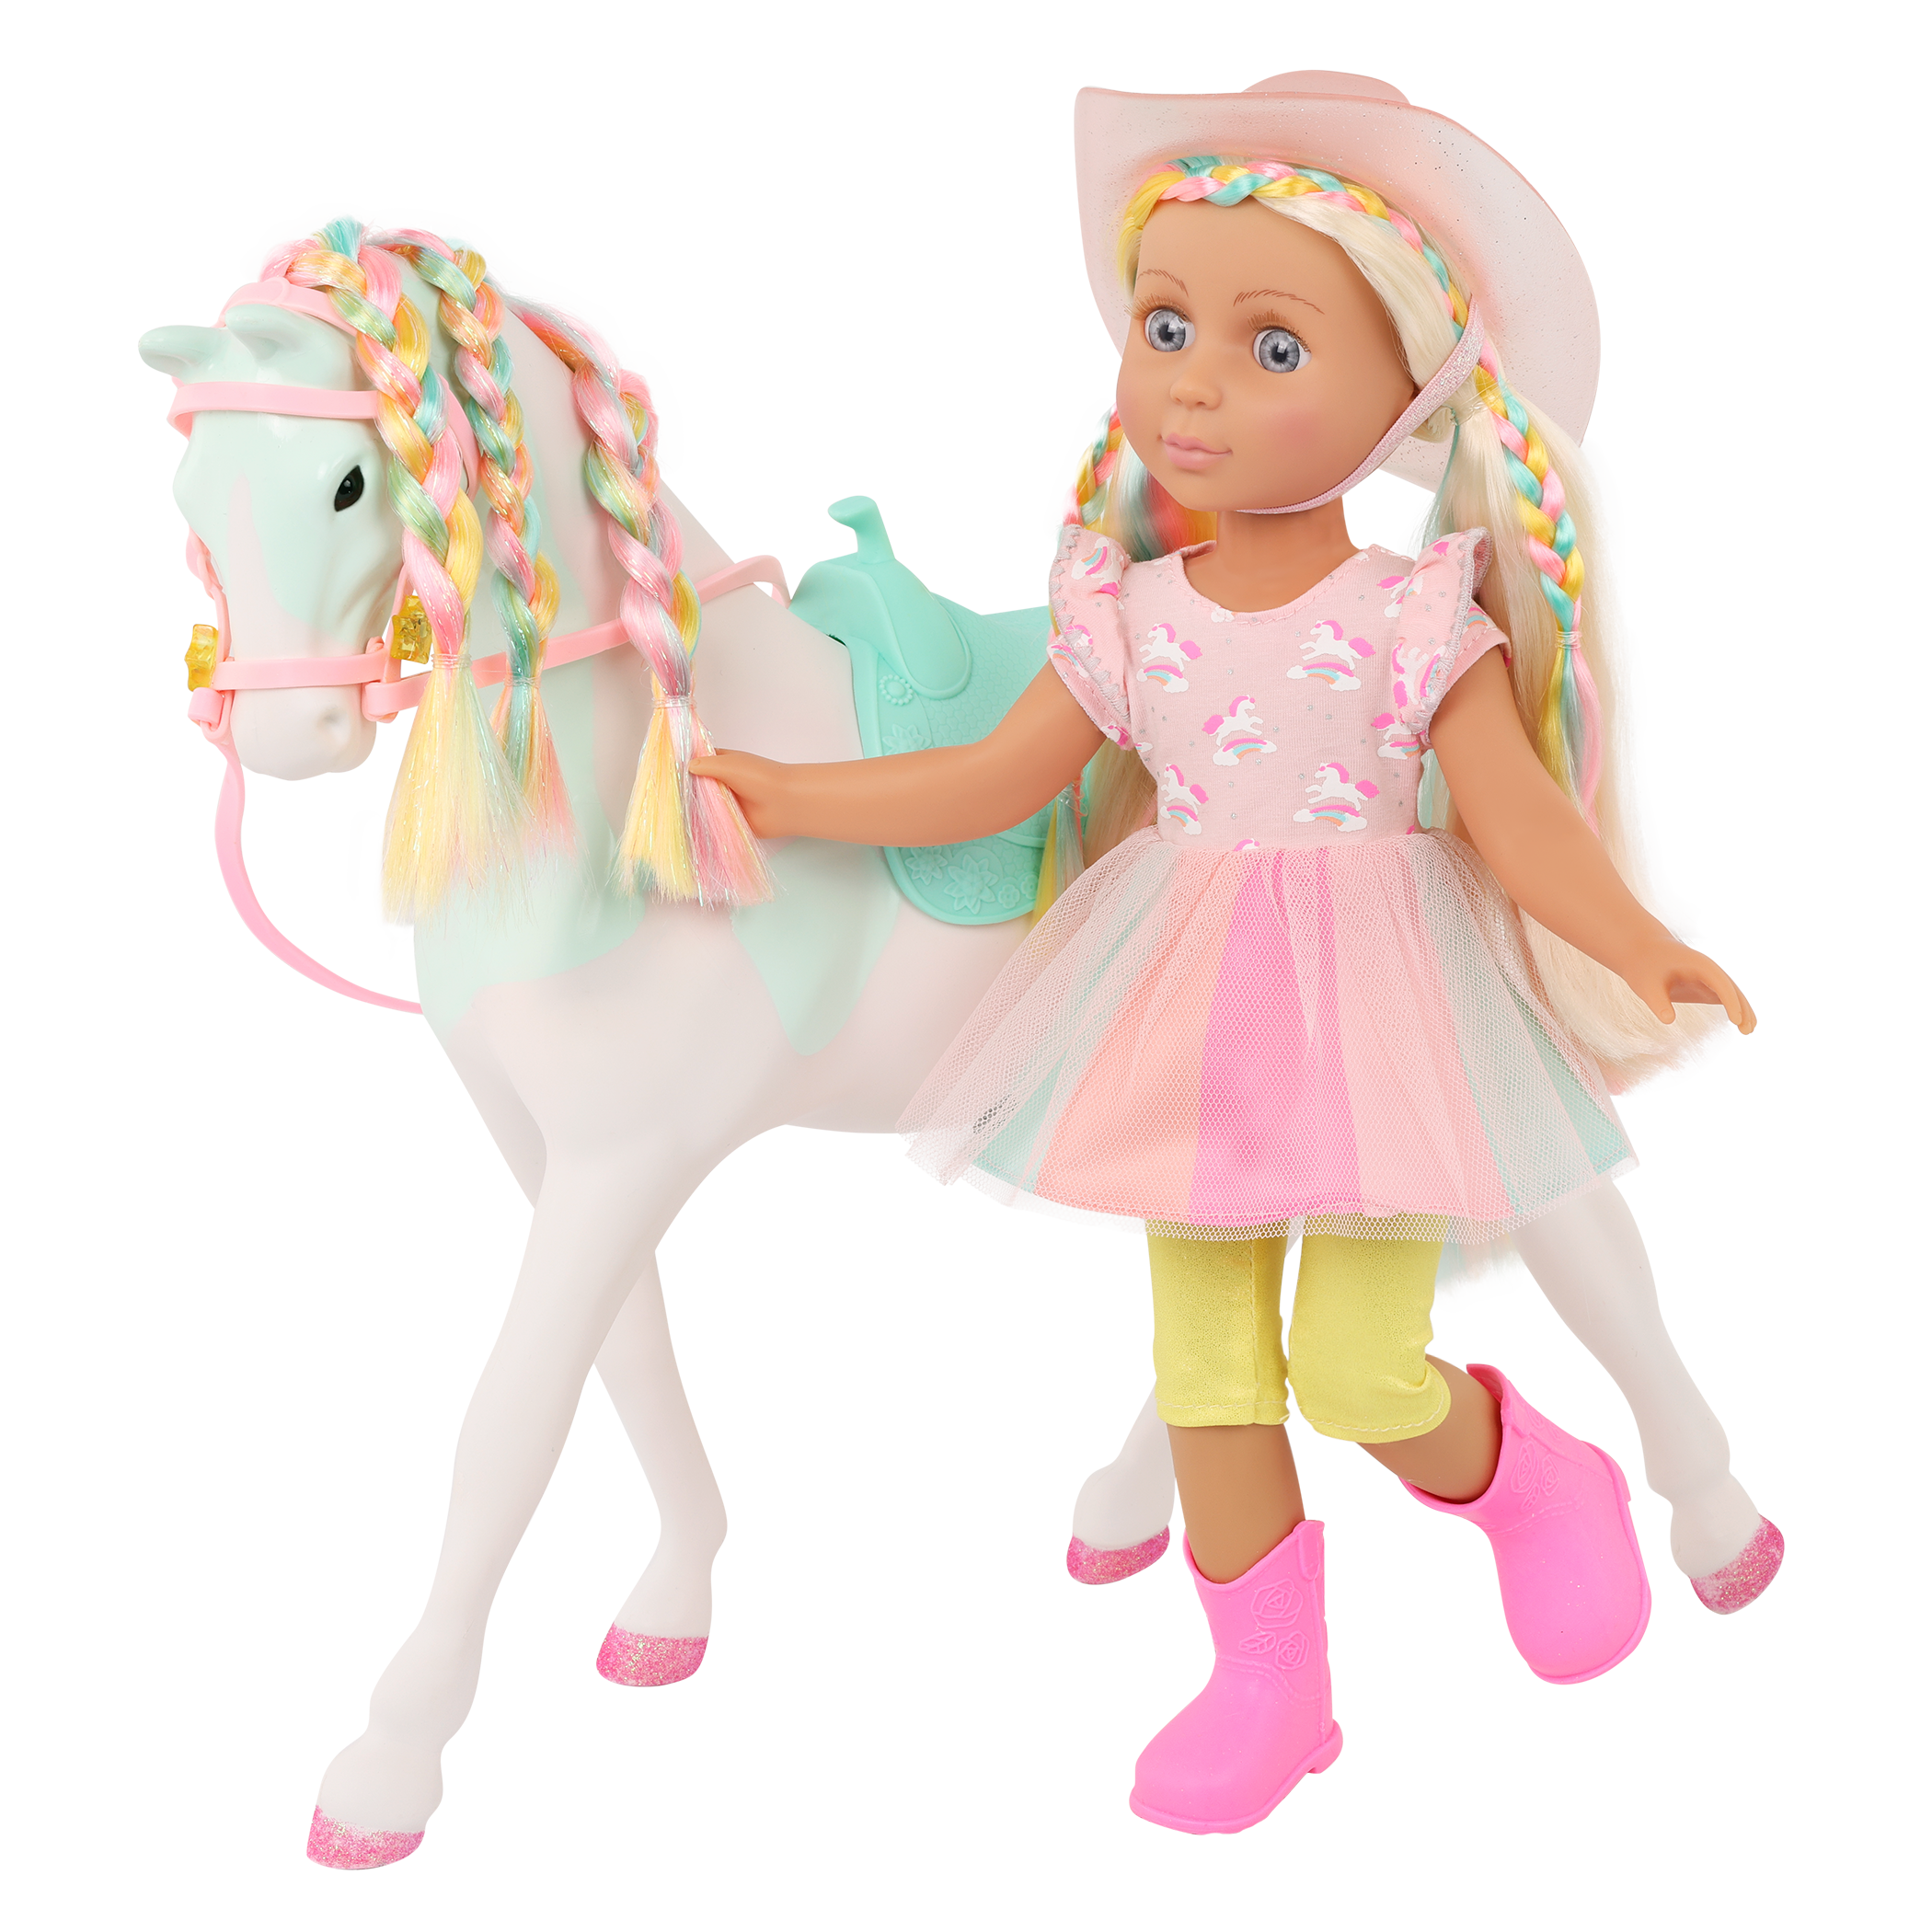 Bright & Learning, 18-inch Doll School Accessories